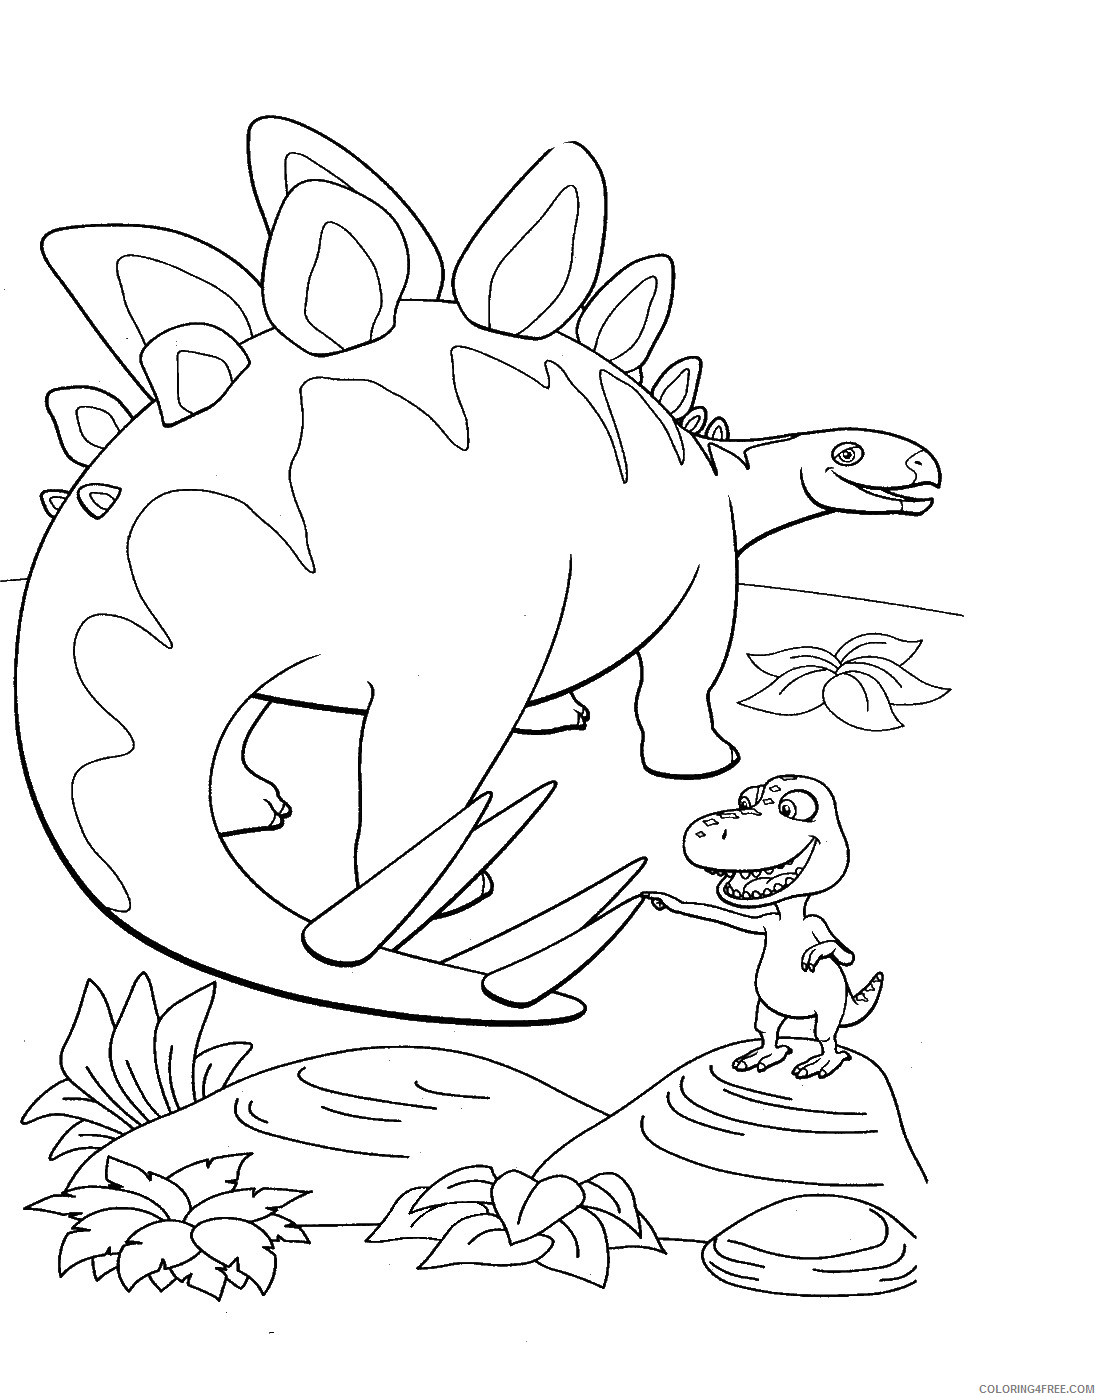 Dinosaur Train Coloring Pages Cartoons dino_train_cl_09 Printable 2020 2230 Coloring4free